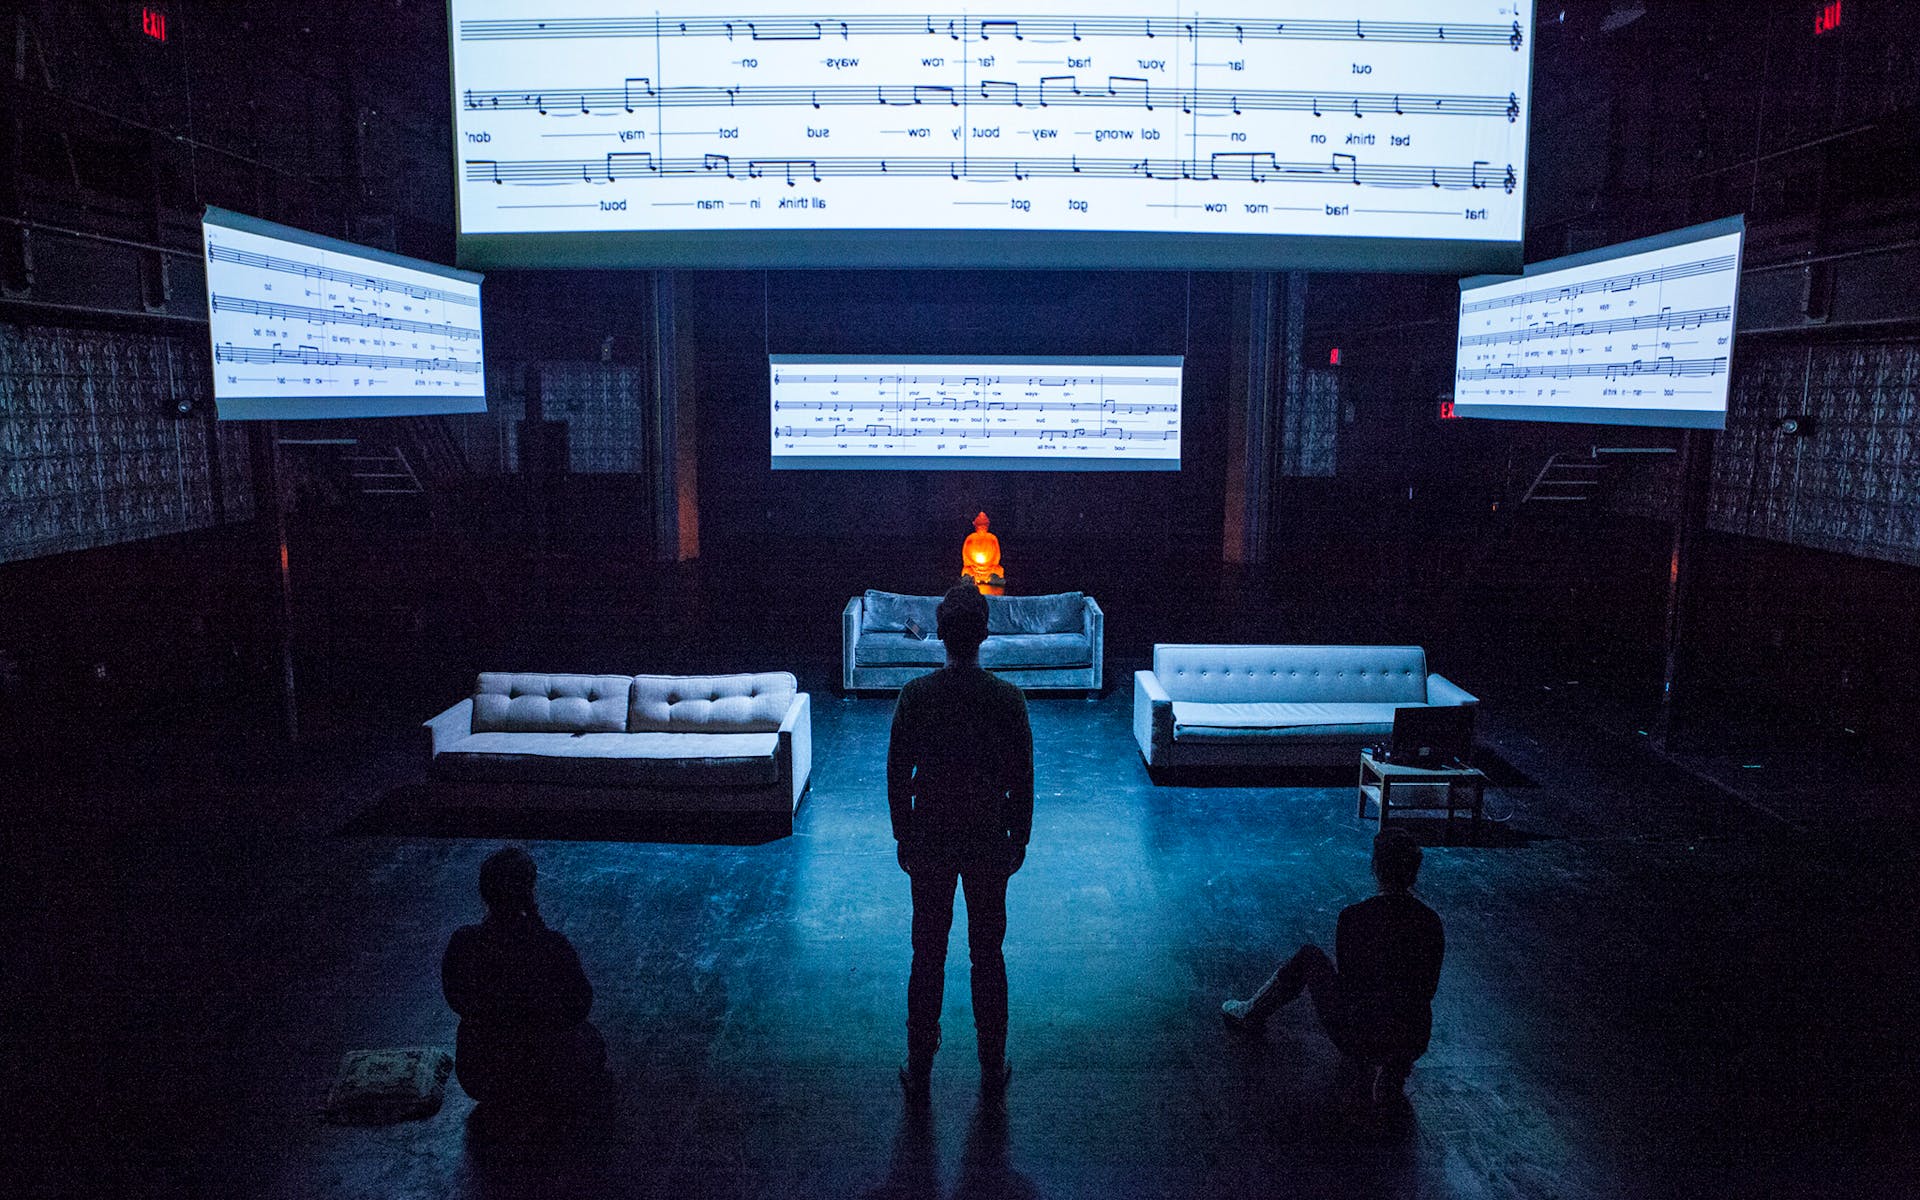 Silhouettes of three people standing and sitting under projections of sheet music.